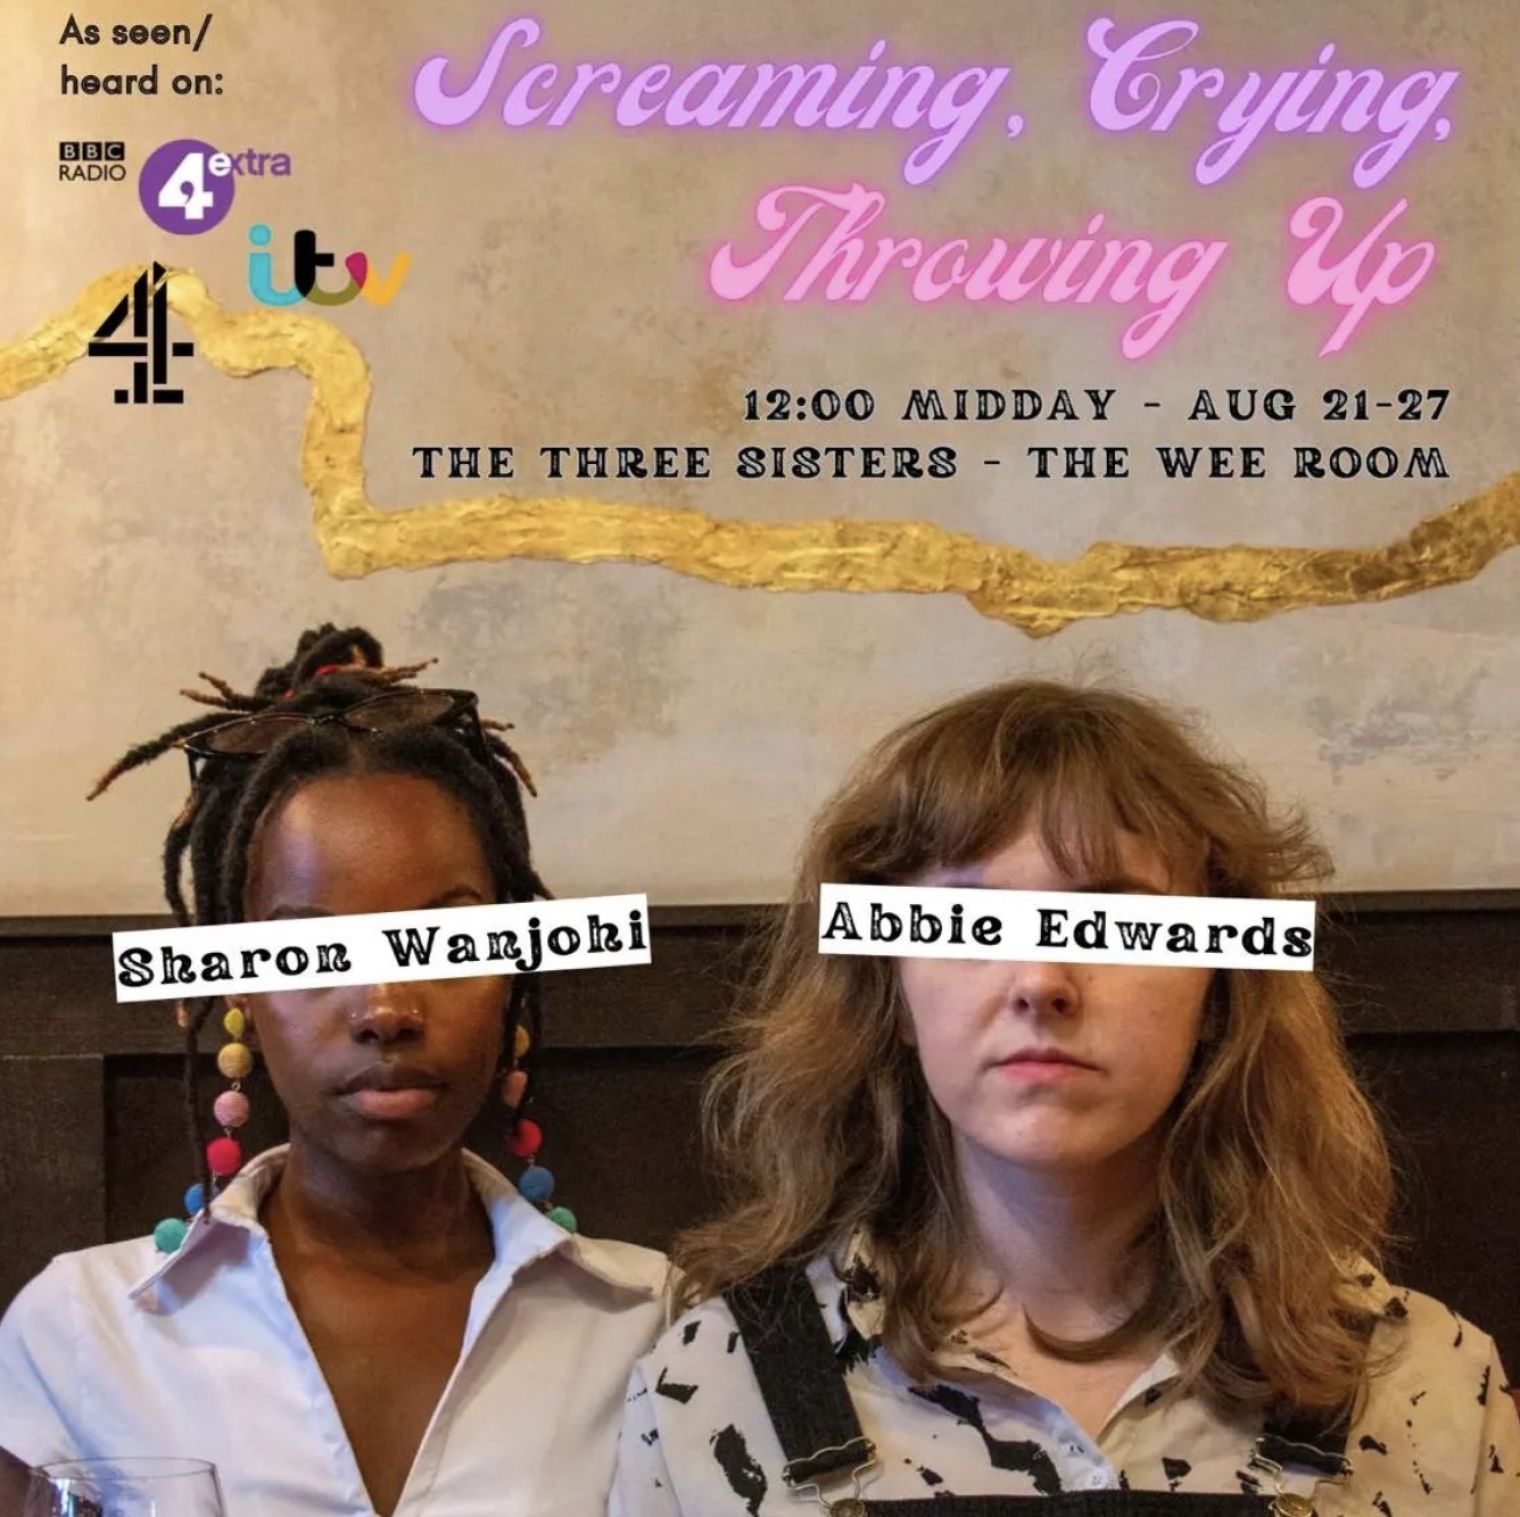 Sharon Wanjohi makes her Edinburgh Festival debut today with her show ’Screaming, Crying, Throwing Up’